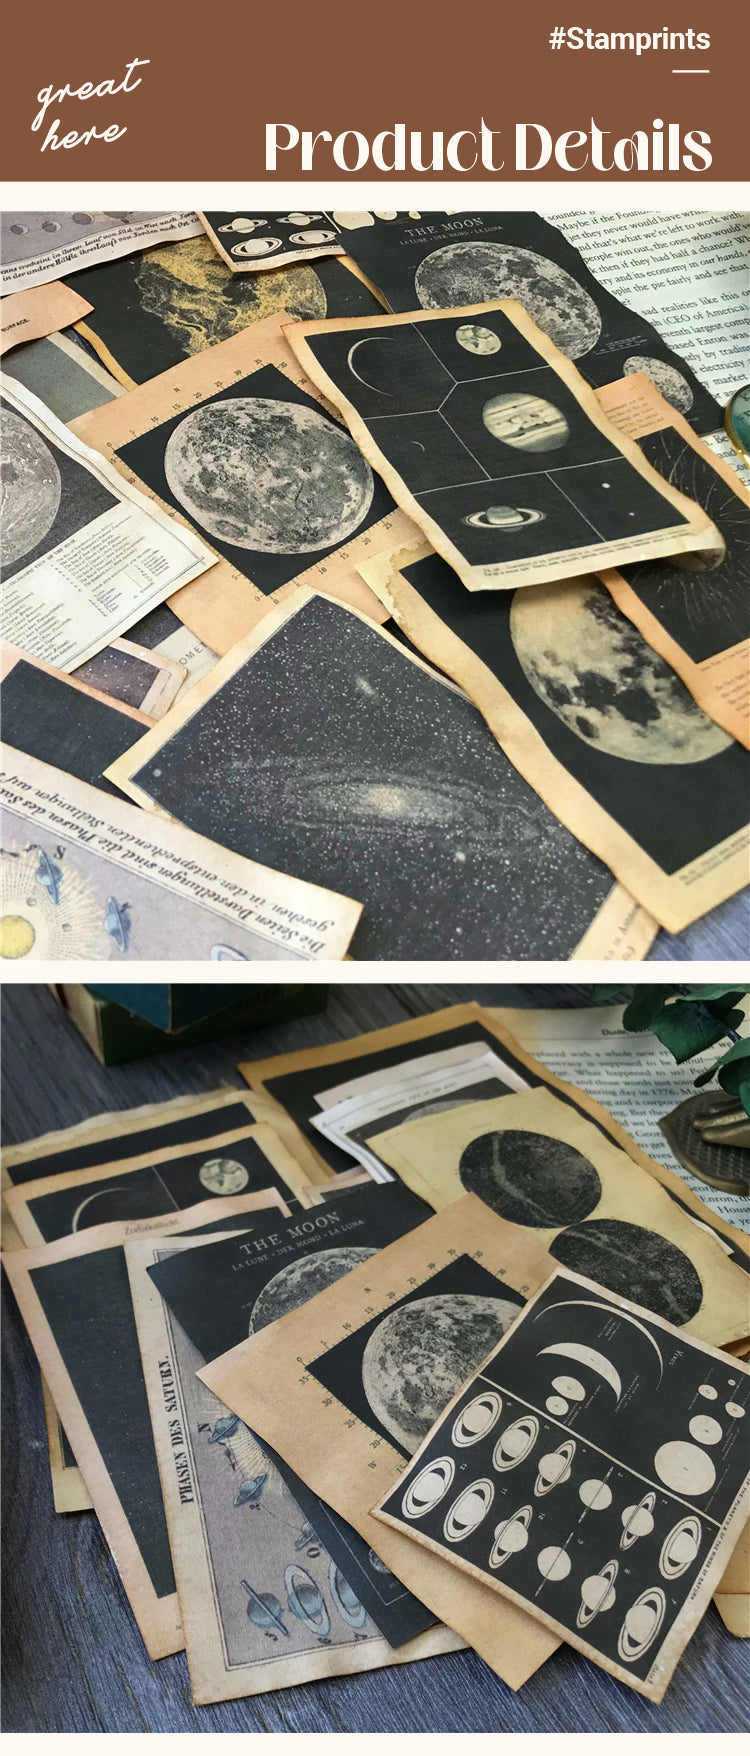 3Characteristics of Handmade Vintage Galaxy Coffee Dyed Scrapbook Paper